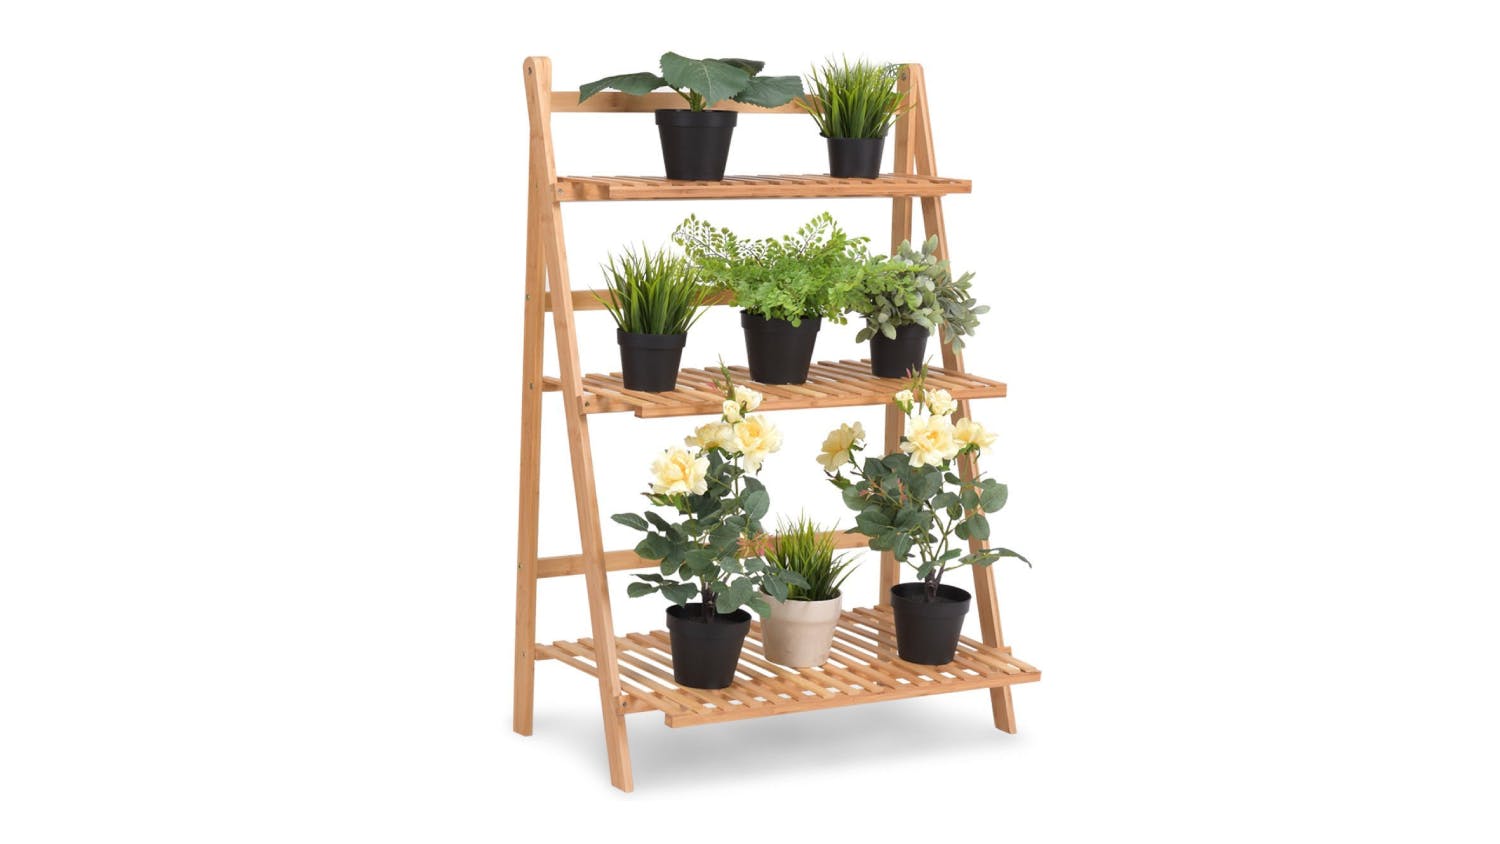 Kmall 3-Tier Folding Bamboo Plant Stand